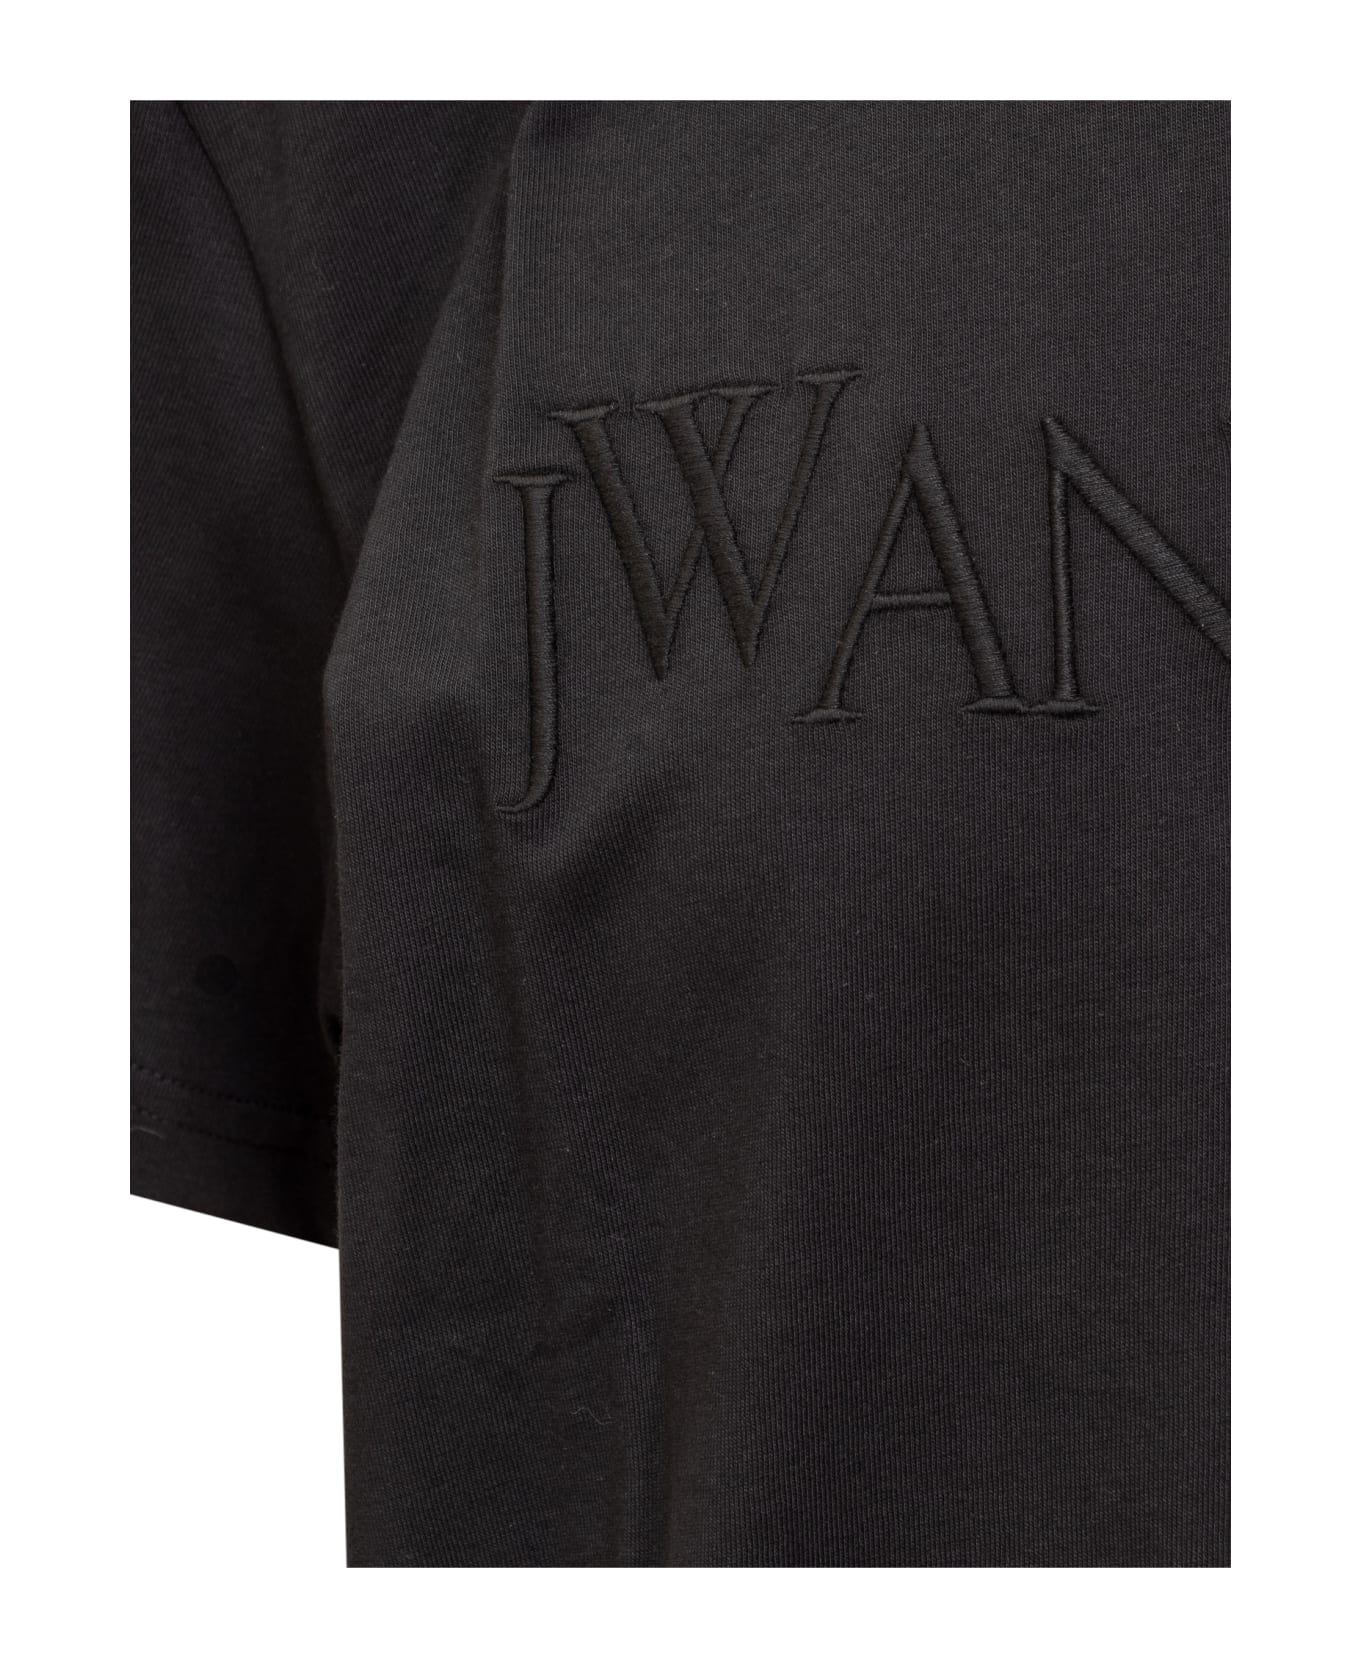 J.W. Anderson T-shirt With Logo - Black